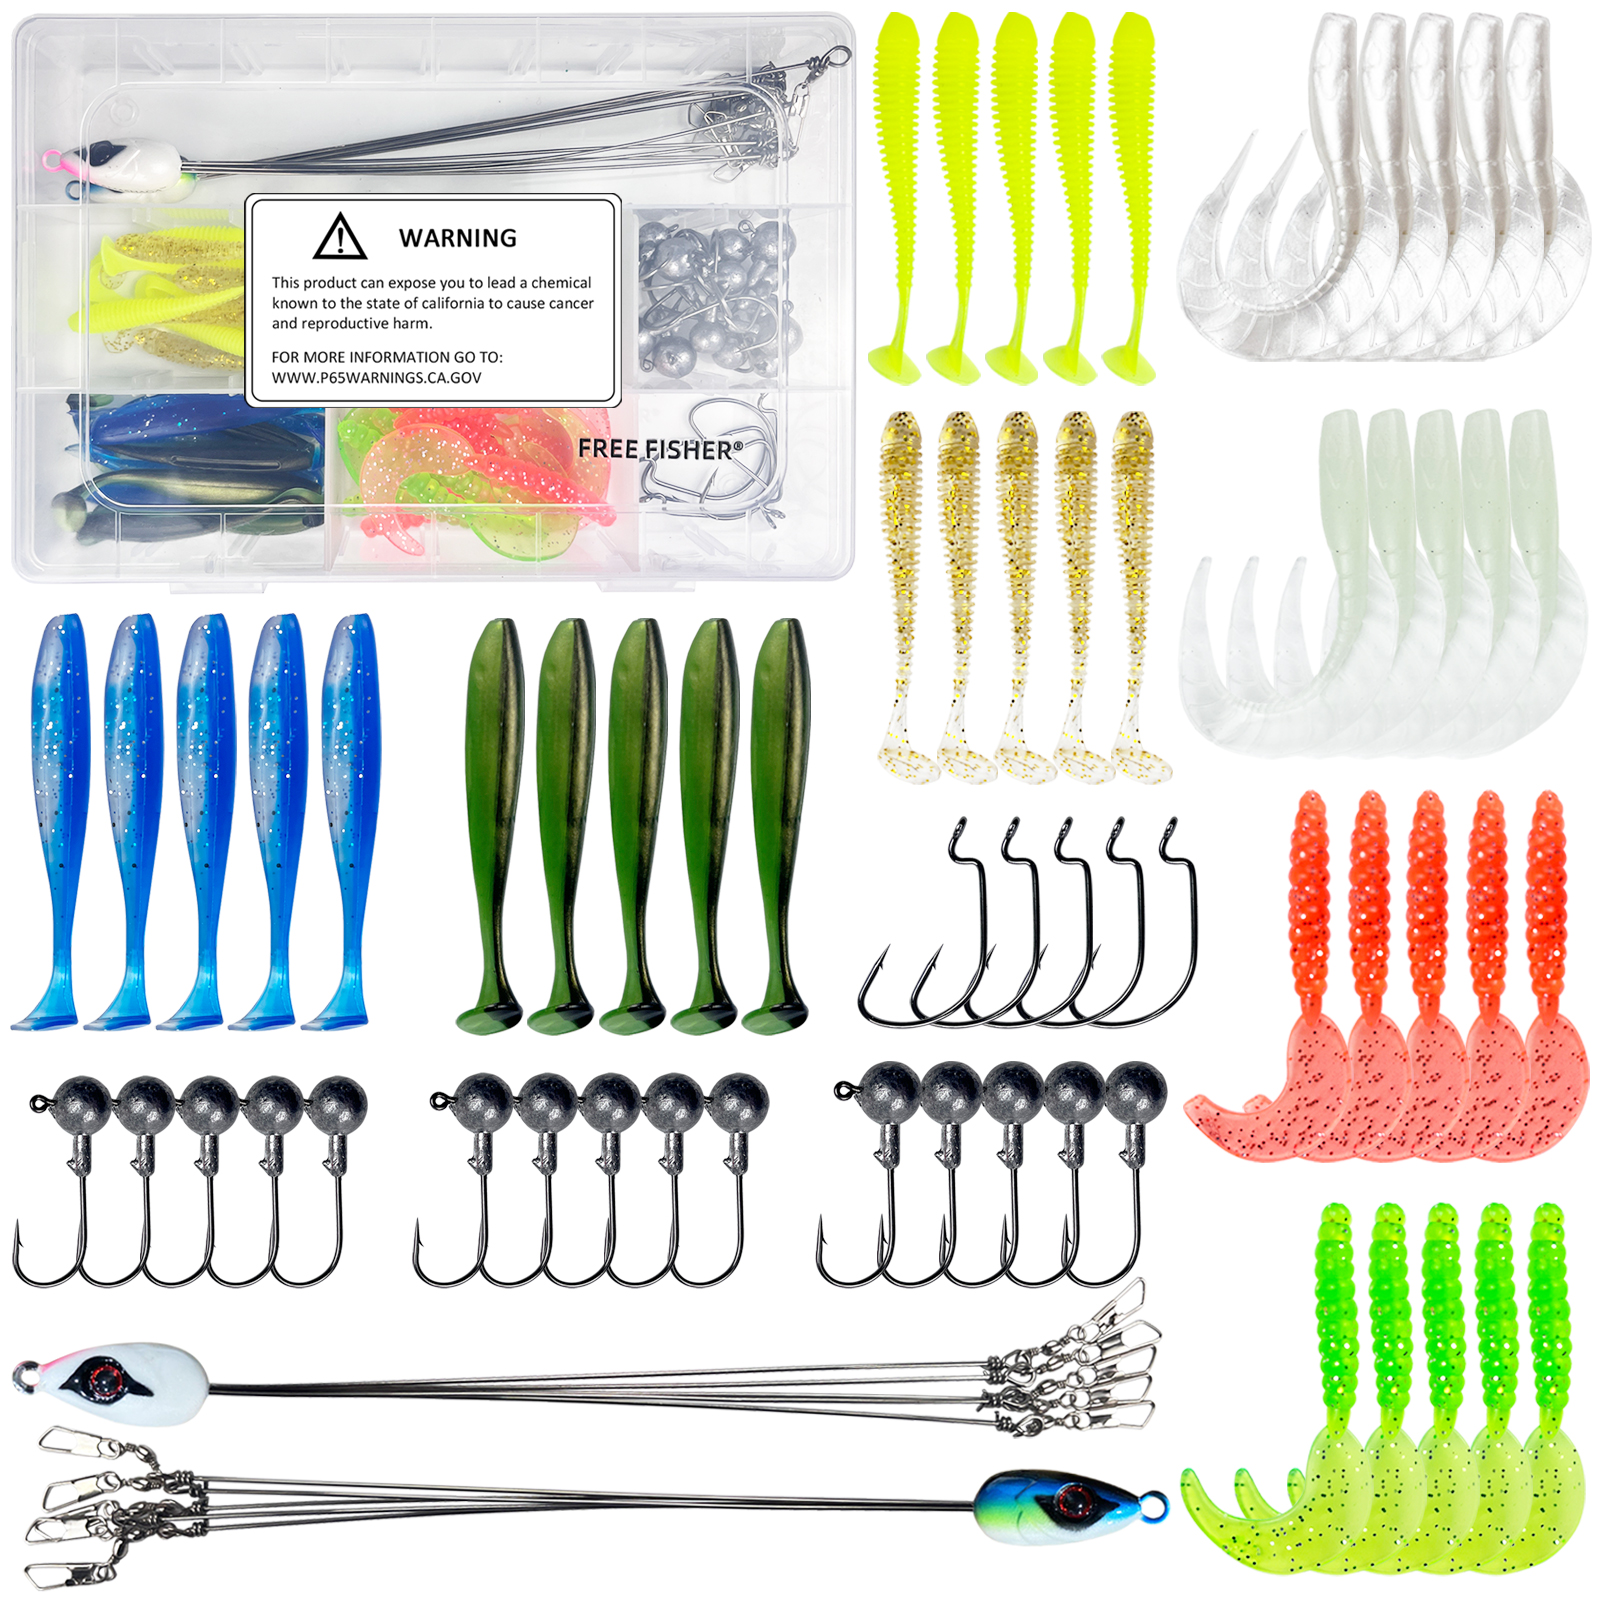 FREE FISHER 63pcs/Box Fishing Soft Lures Set Umbrella Rigs with 5-Arm Alabama Rig Baits Hooks Fishing Tackle Box for Freshwater/Saltwater